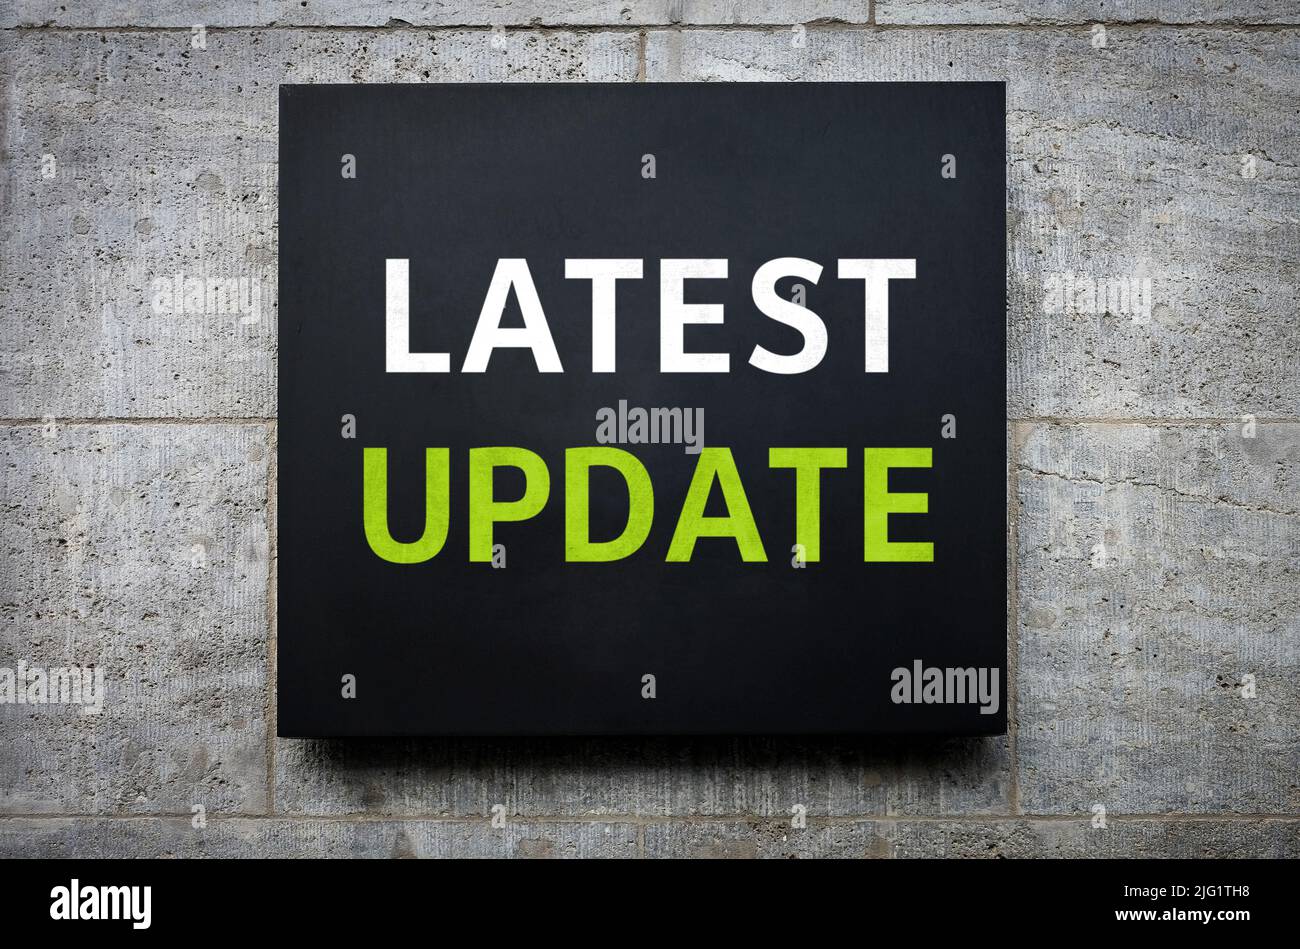 Latest Update - words on wall board Stock Photo